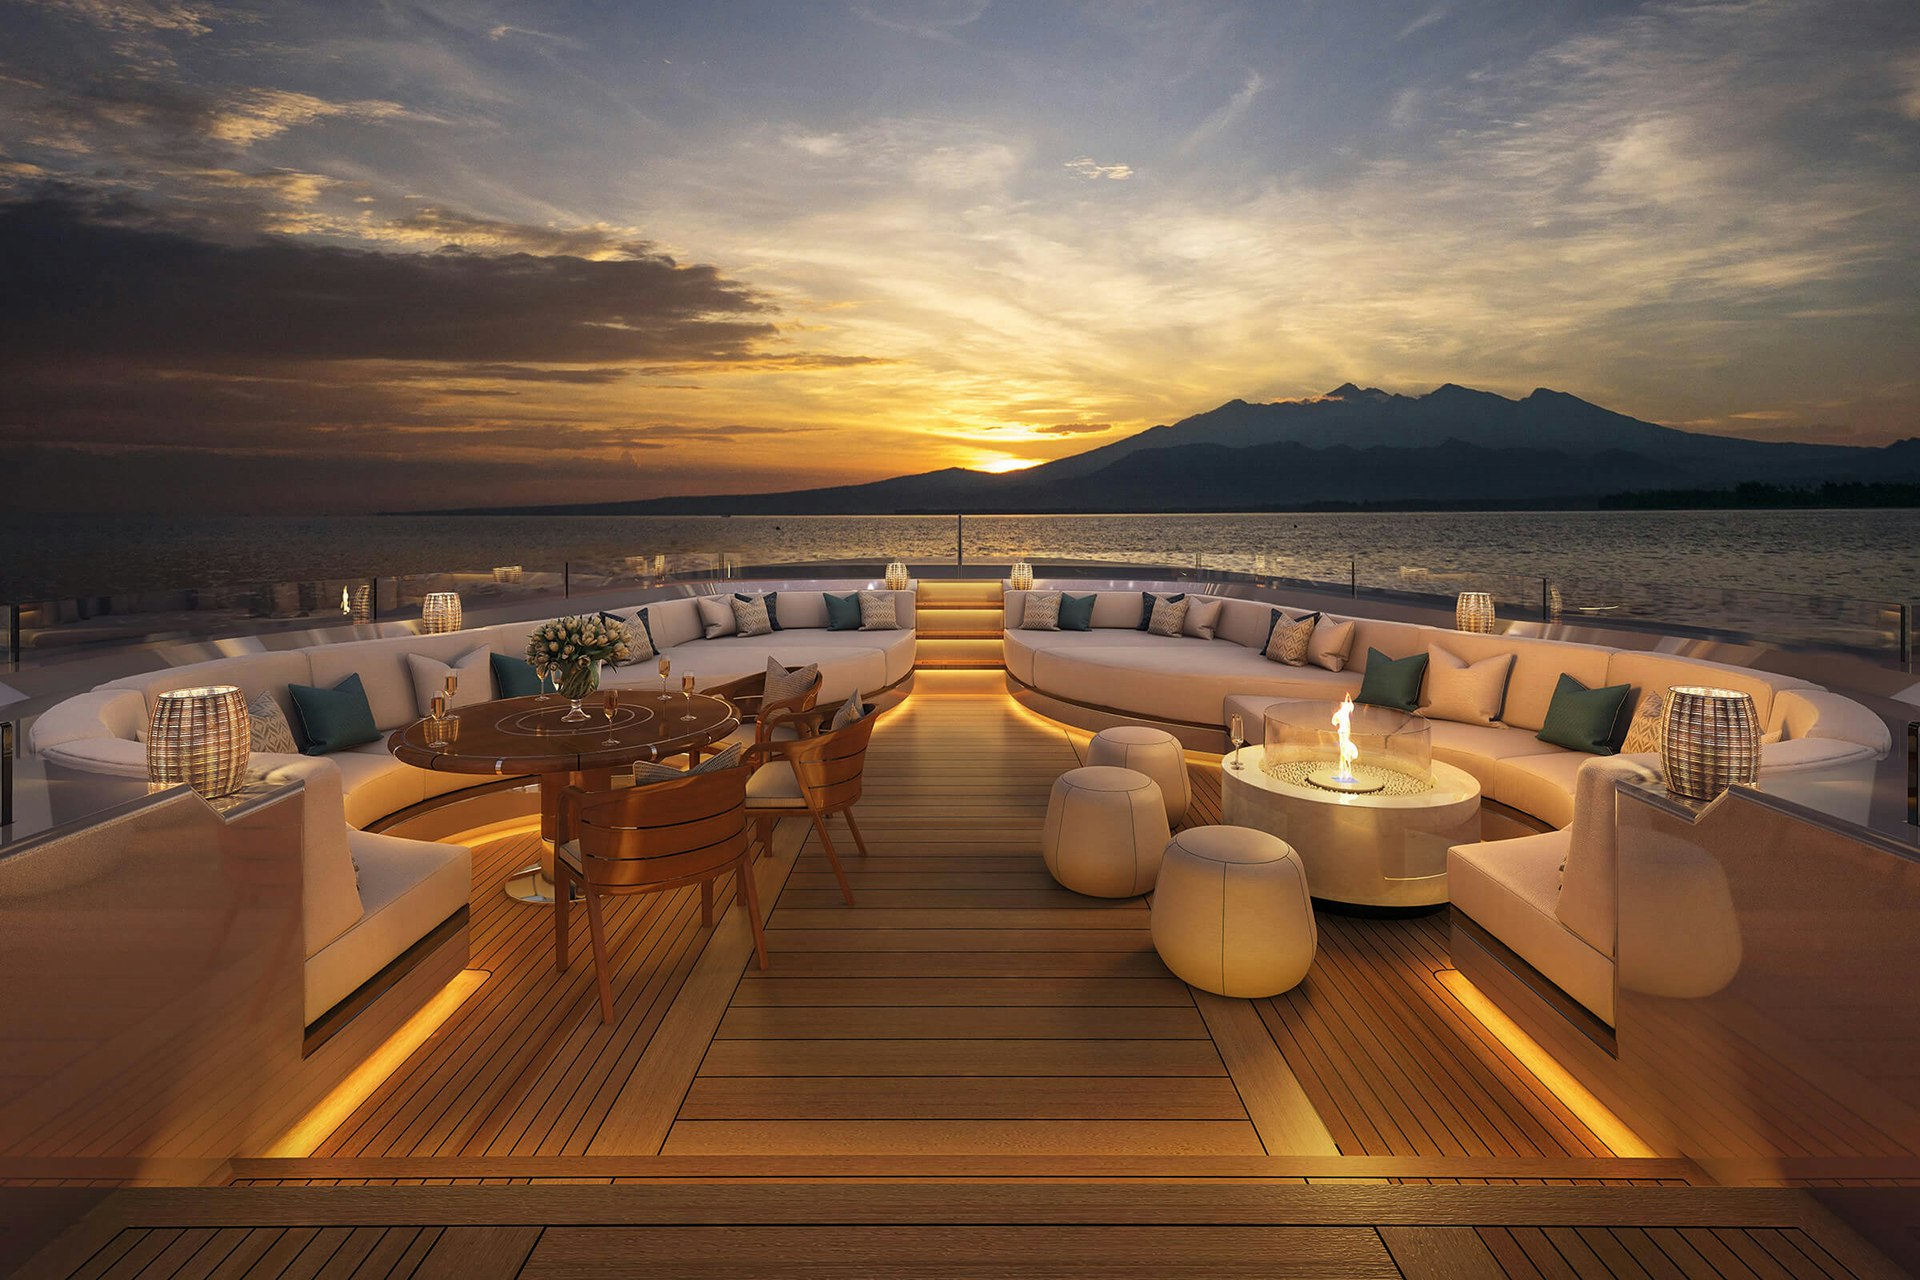 Yacht exterior at sunset.